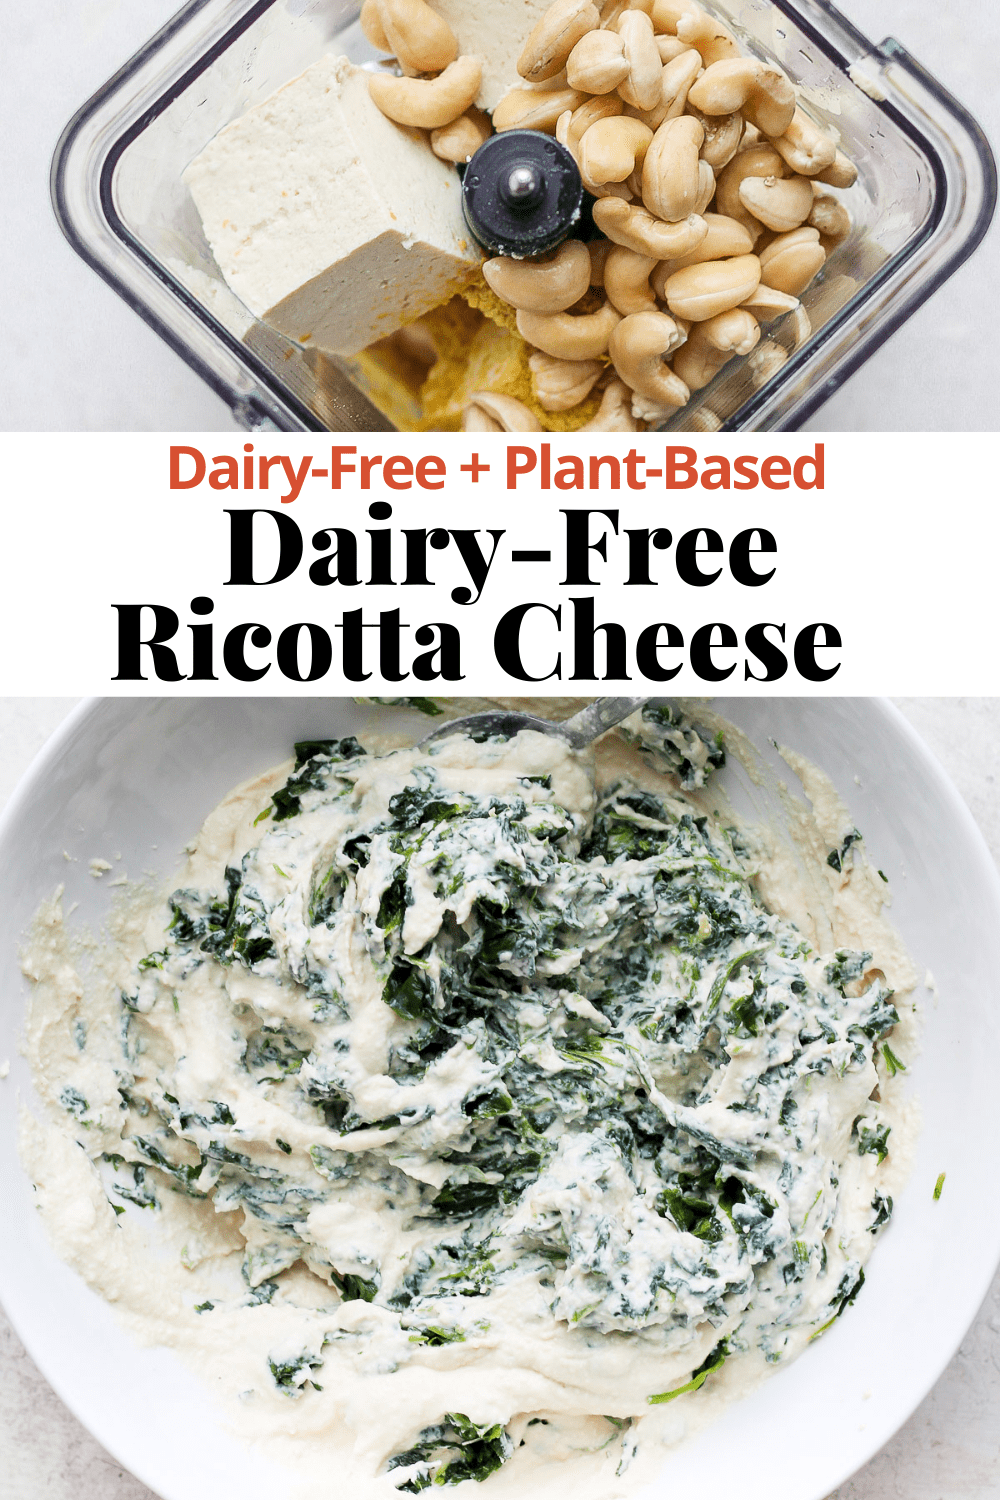 Pinterest image for dairy-free ricotta cheese.